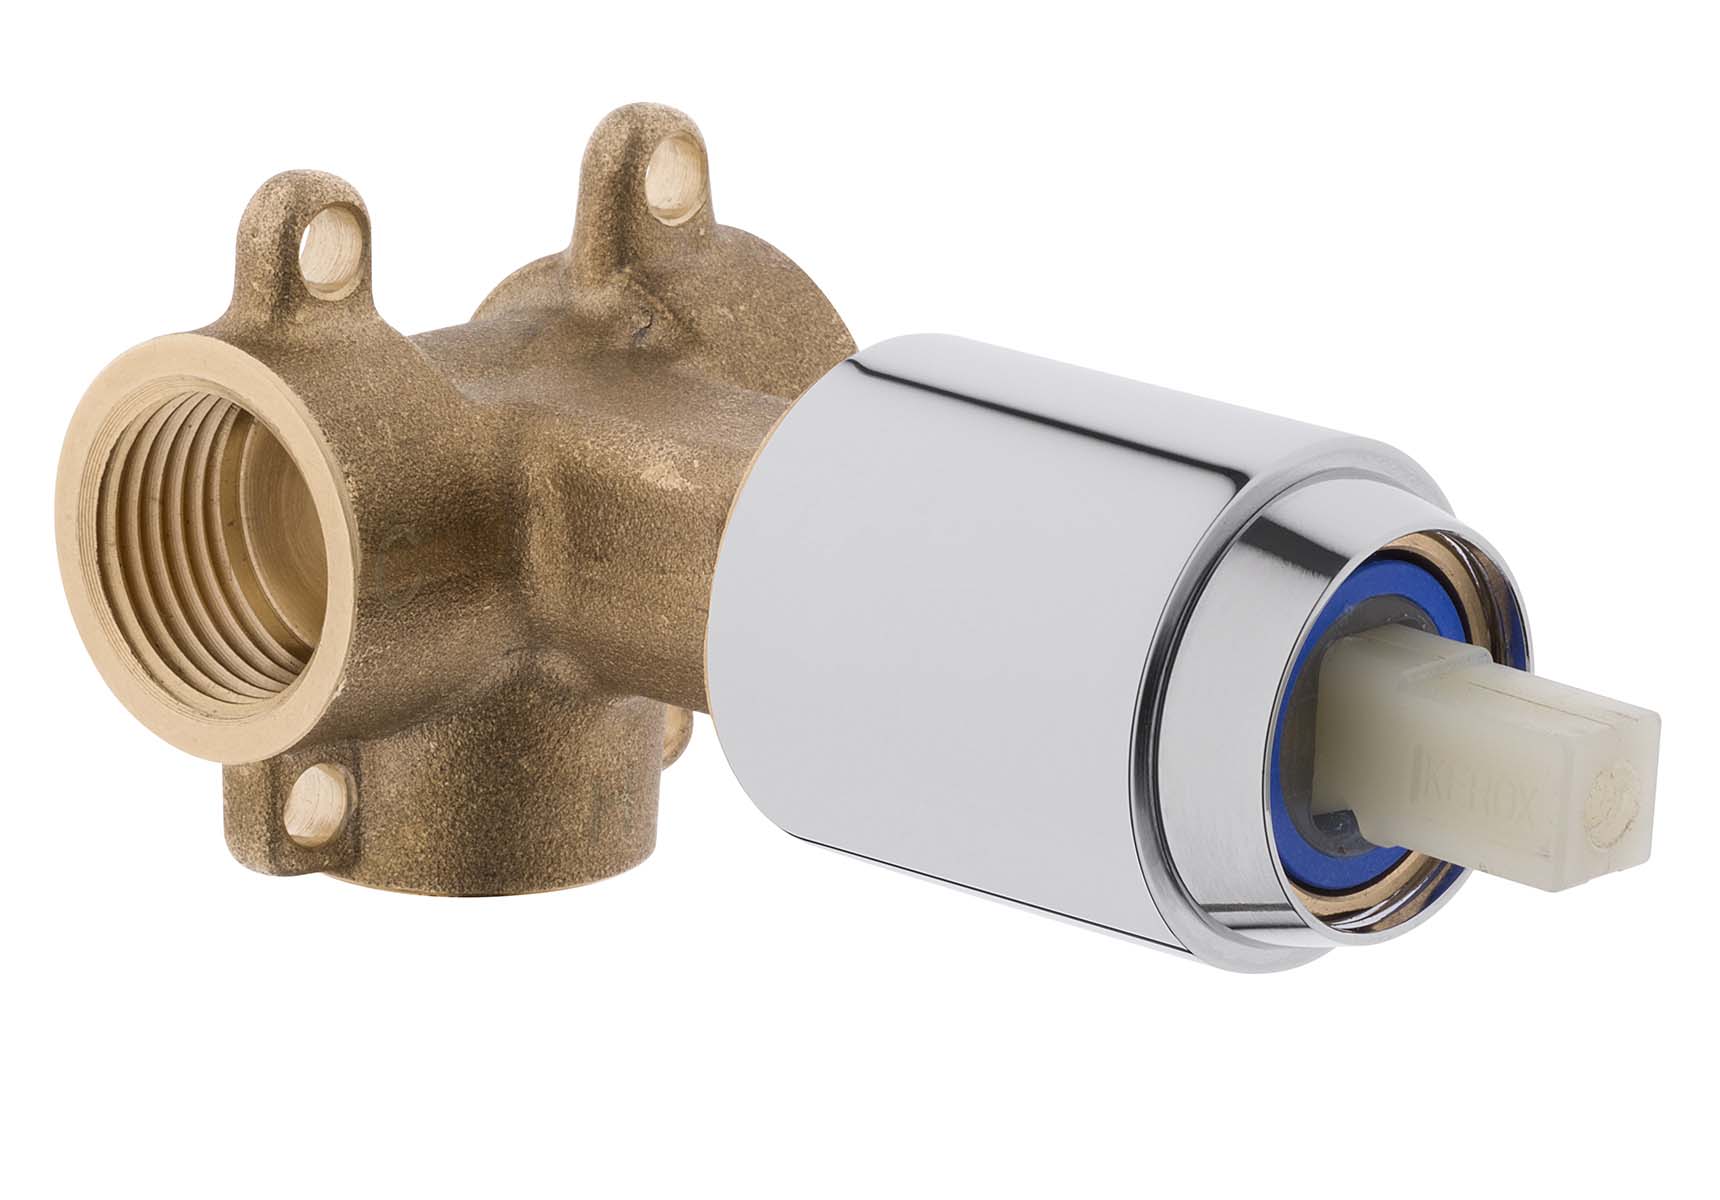 Built-in stop valve mix (concealed part)